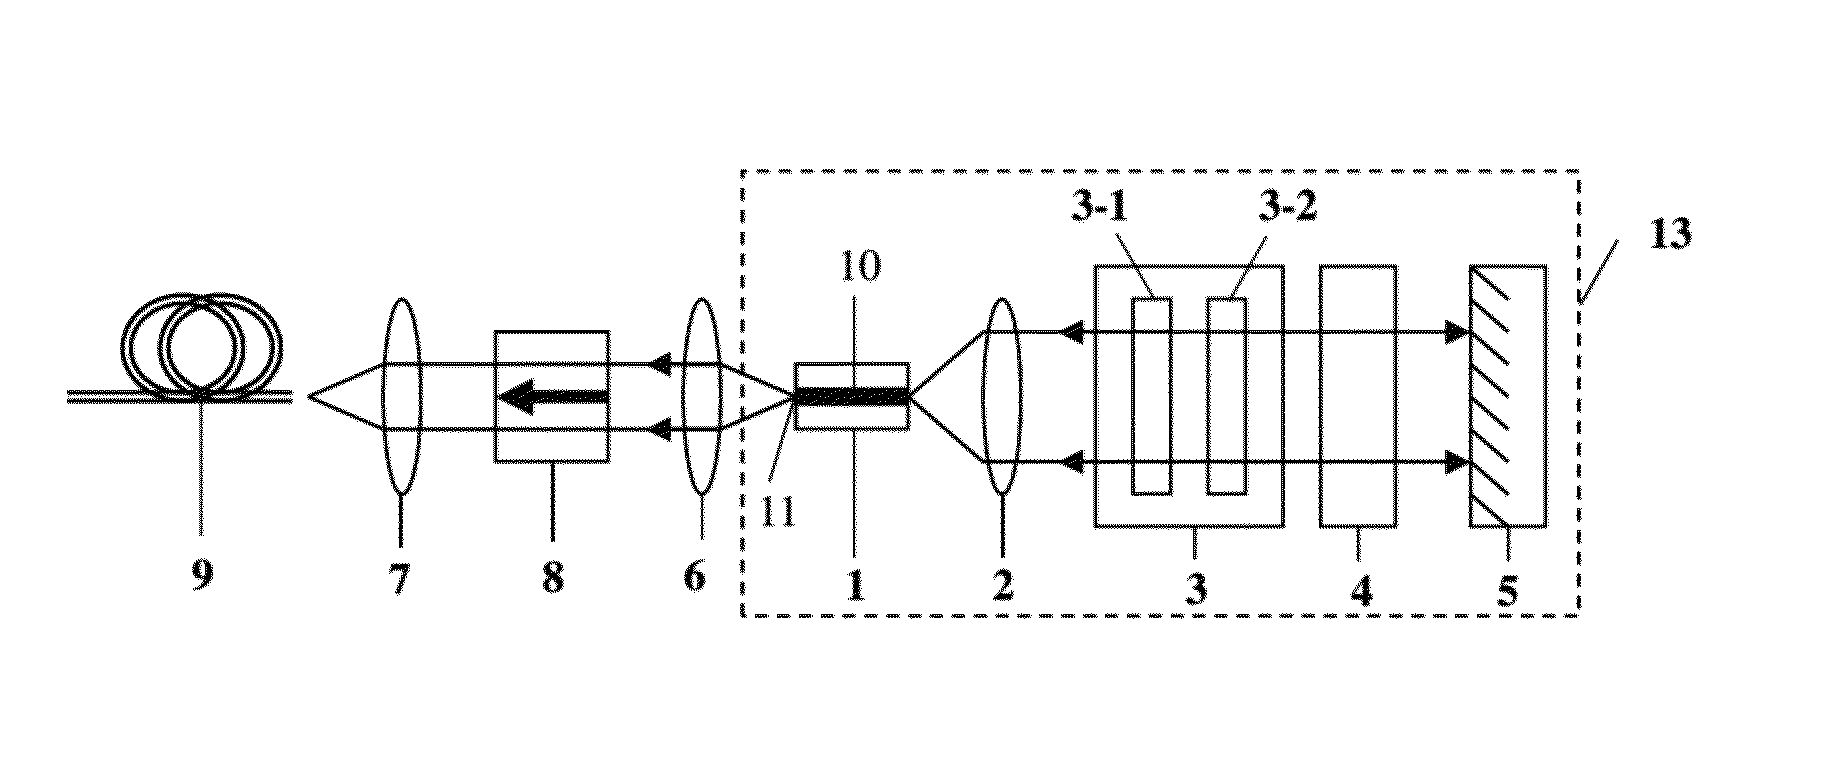 External-cavity tunable laser with flexible wavelength grid tuning function